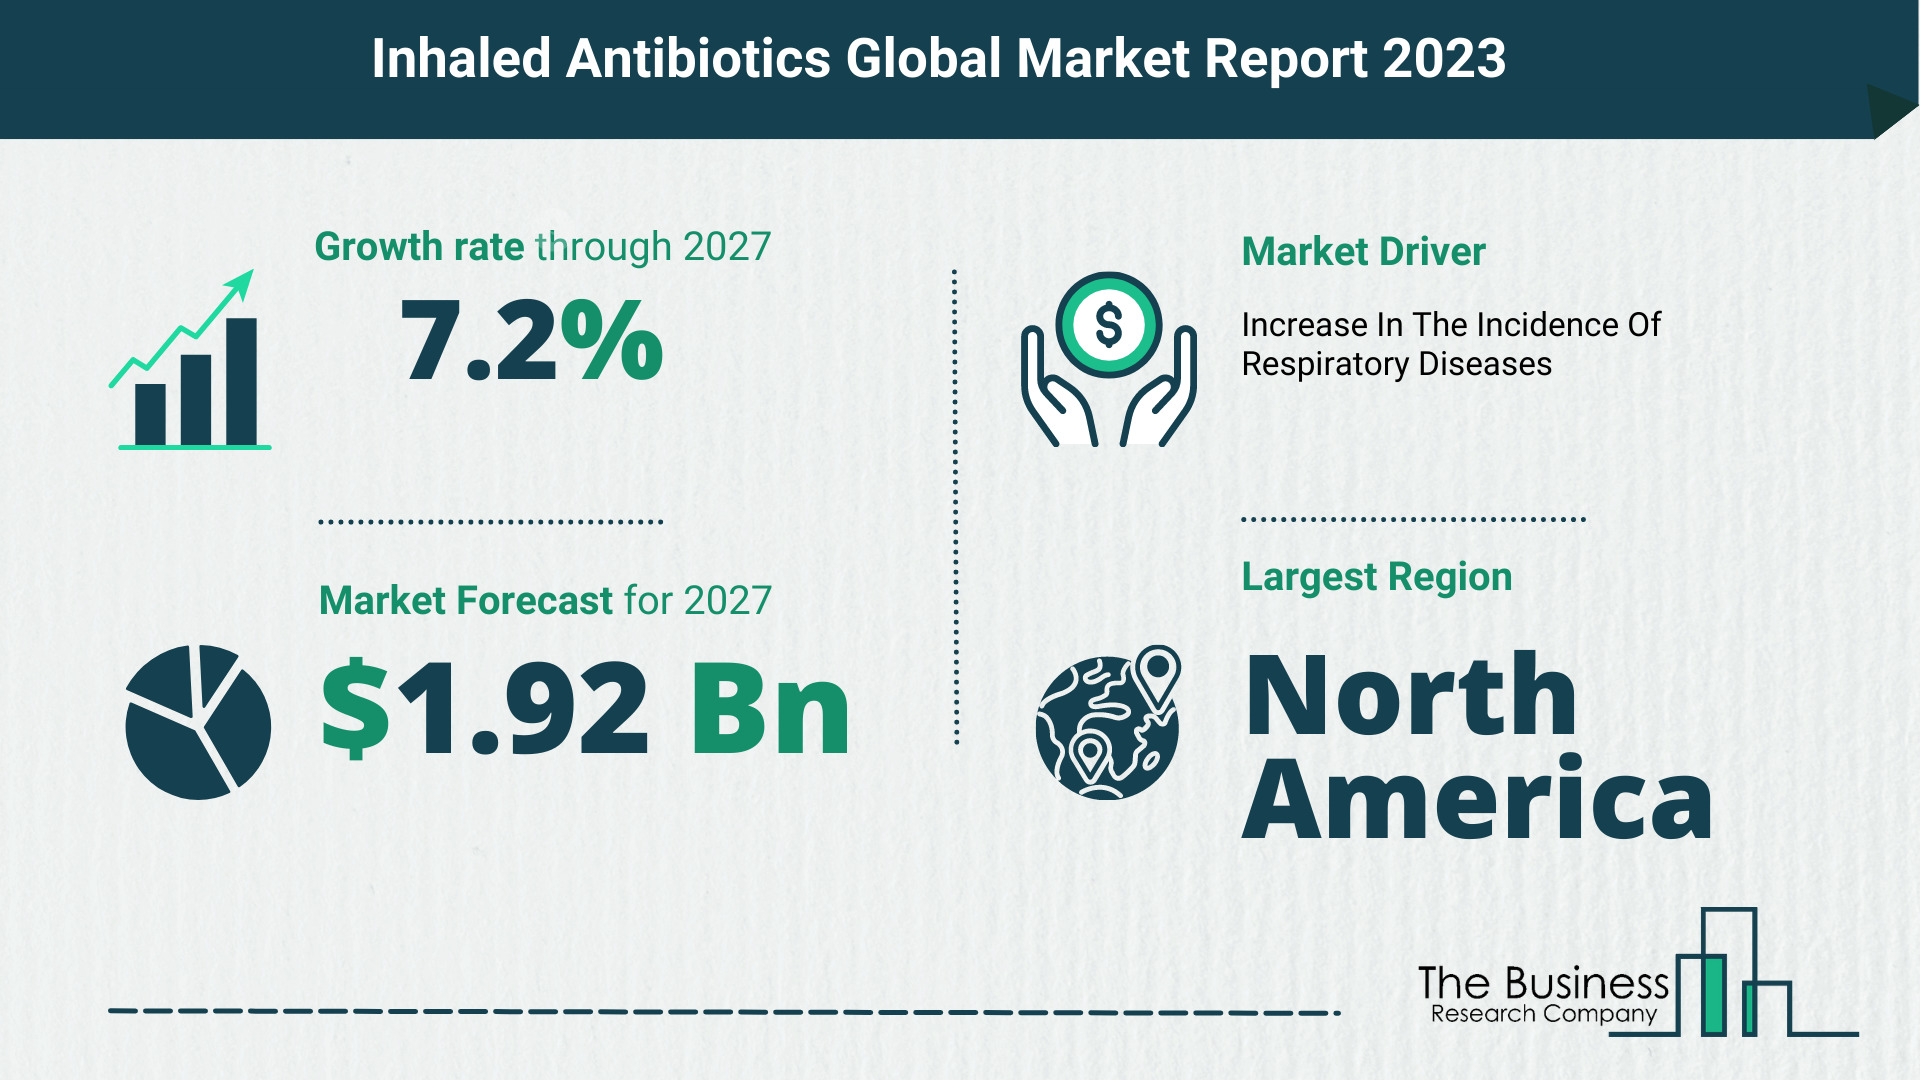 What Will The Inhaled Antibiotics Market Look Like In 2023?